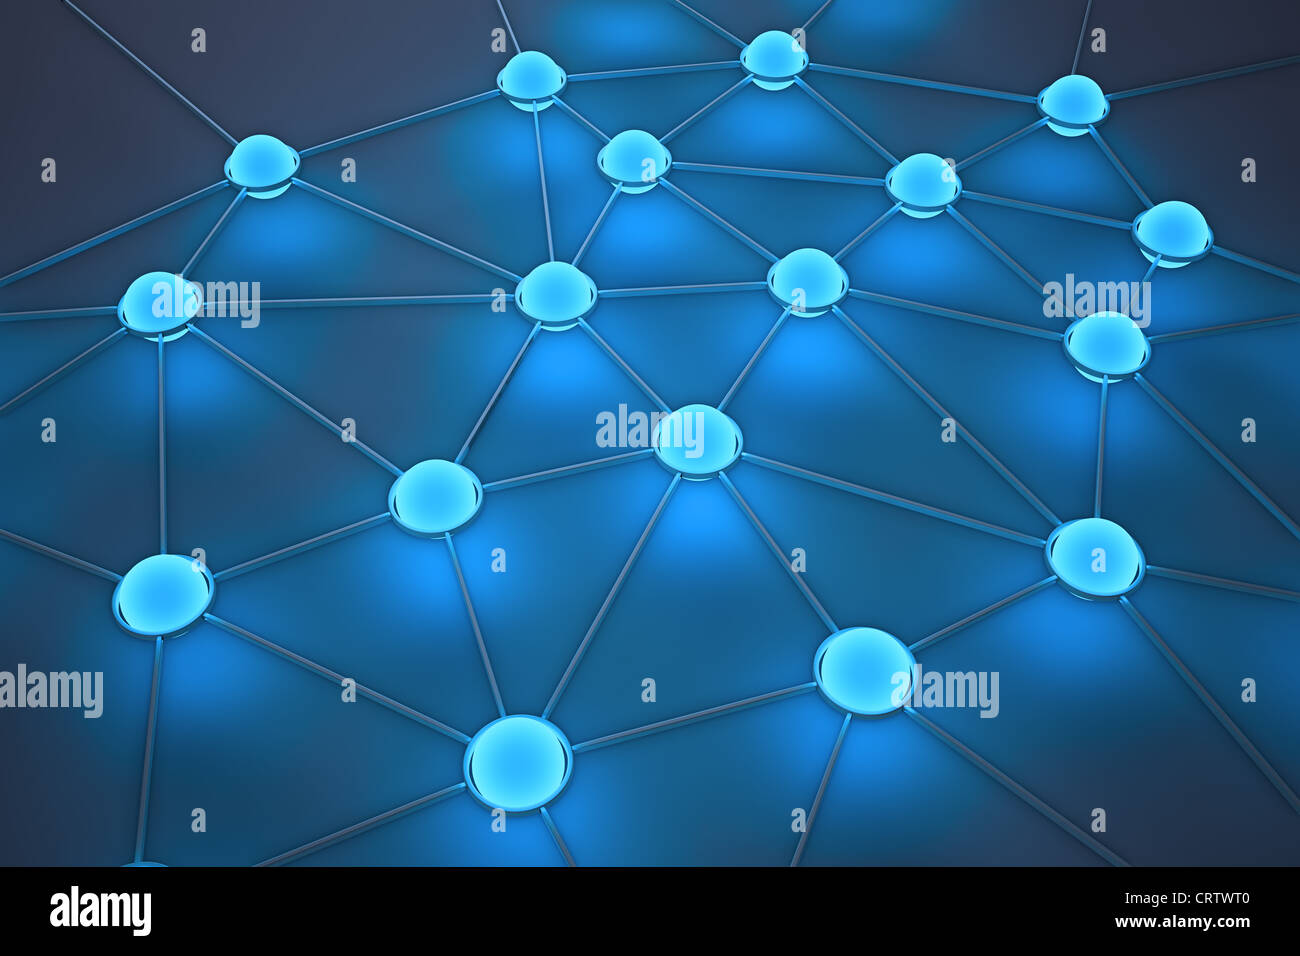 Network abstract Stock Photo